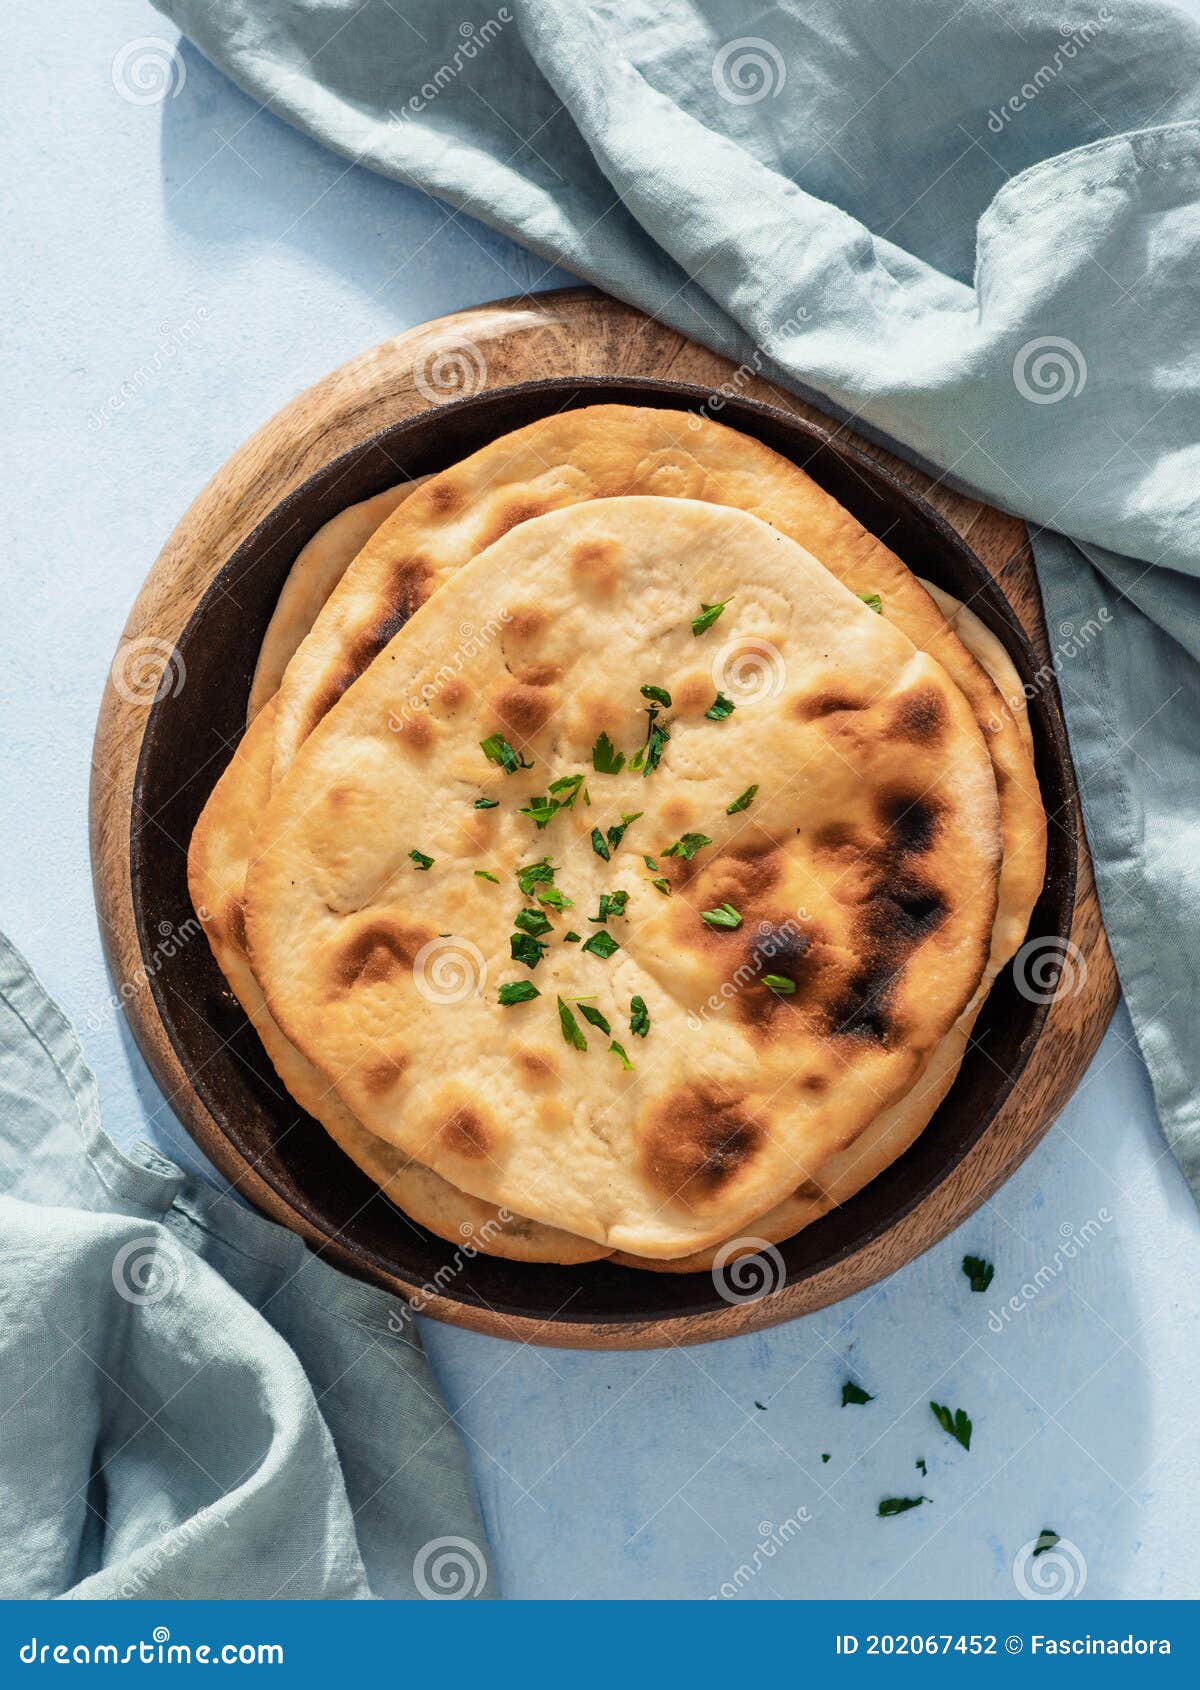 naan flatbread on blue, copy space, top view